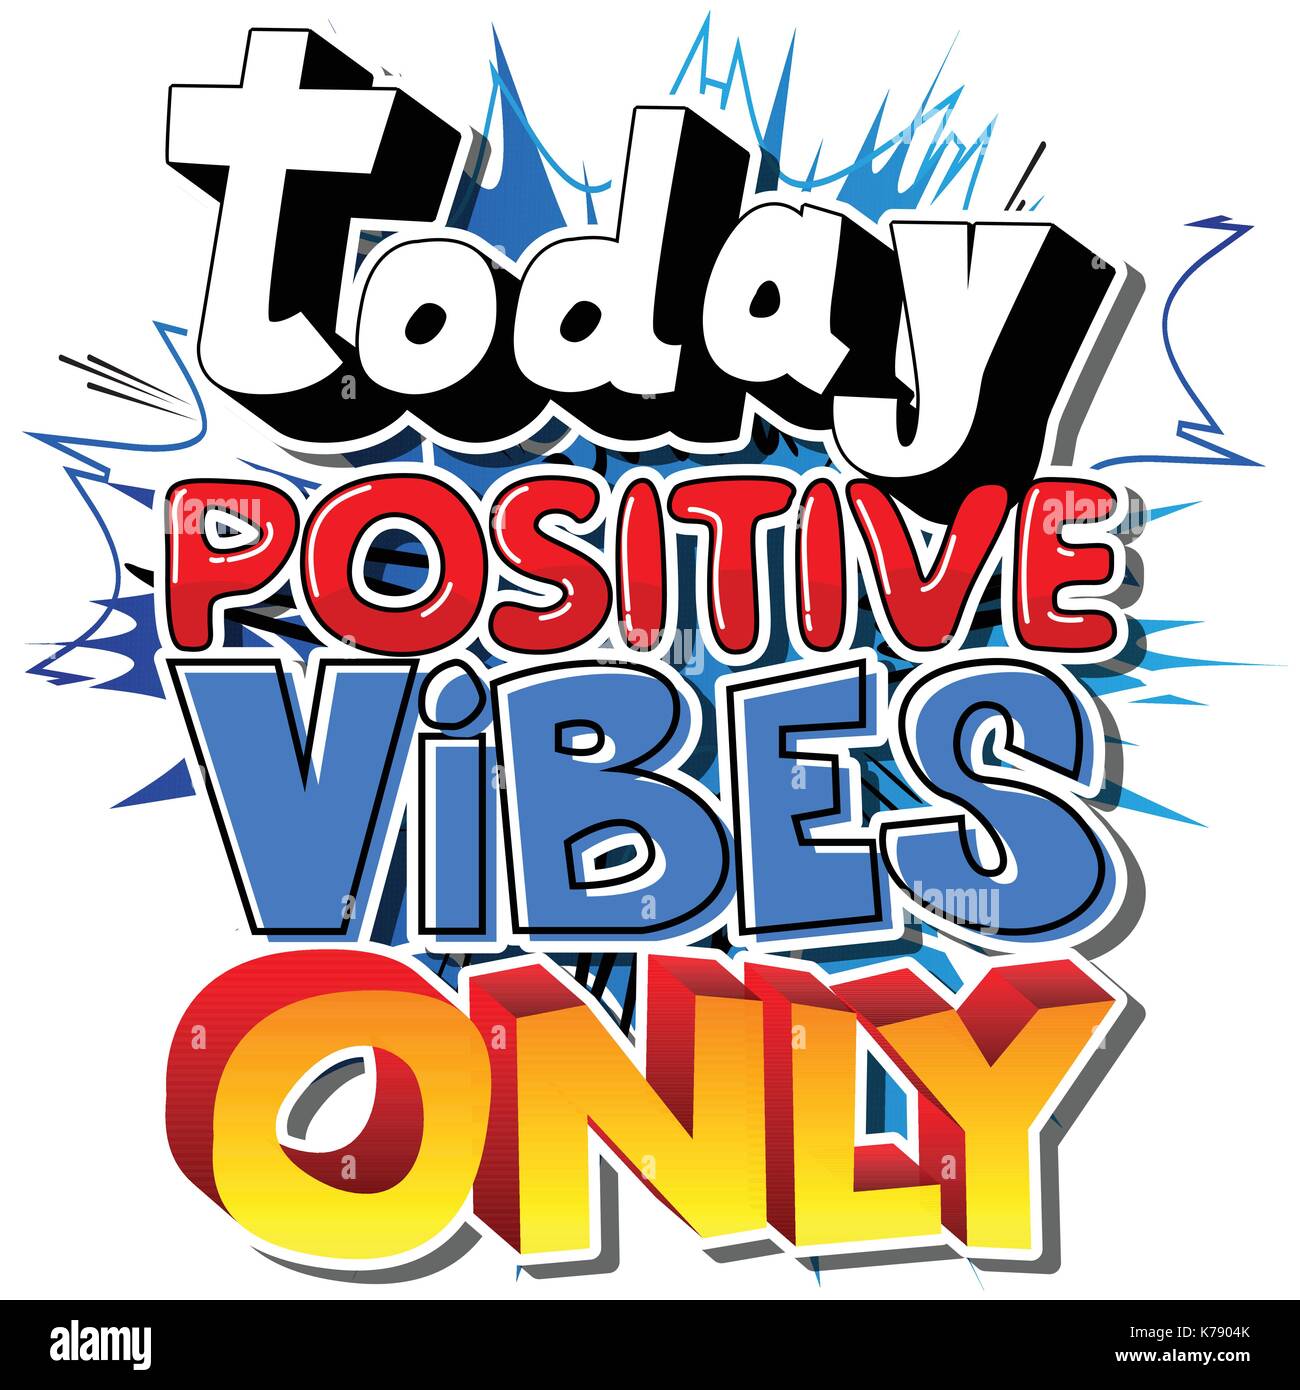 Today Positive Vibes Only. Vector illustrated comic book style design. Inspirational, motivational quote. Stock Vector